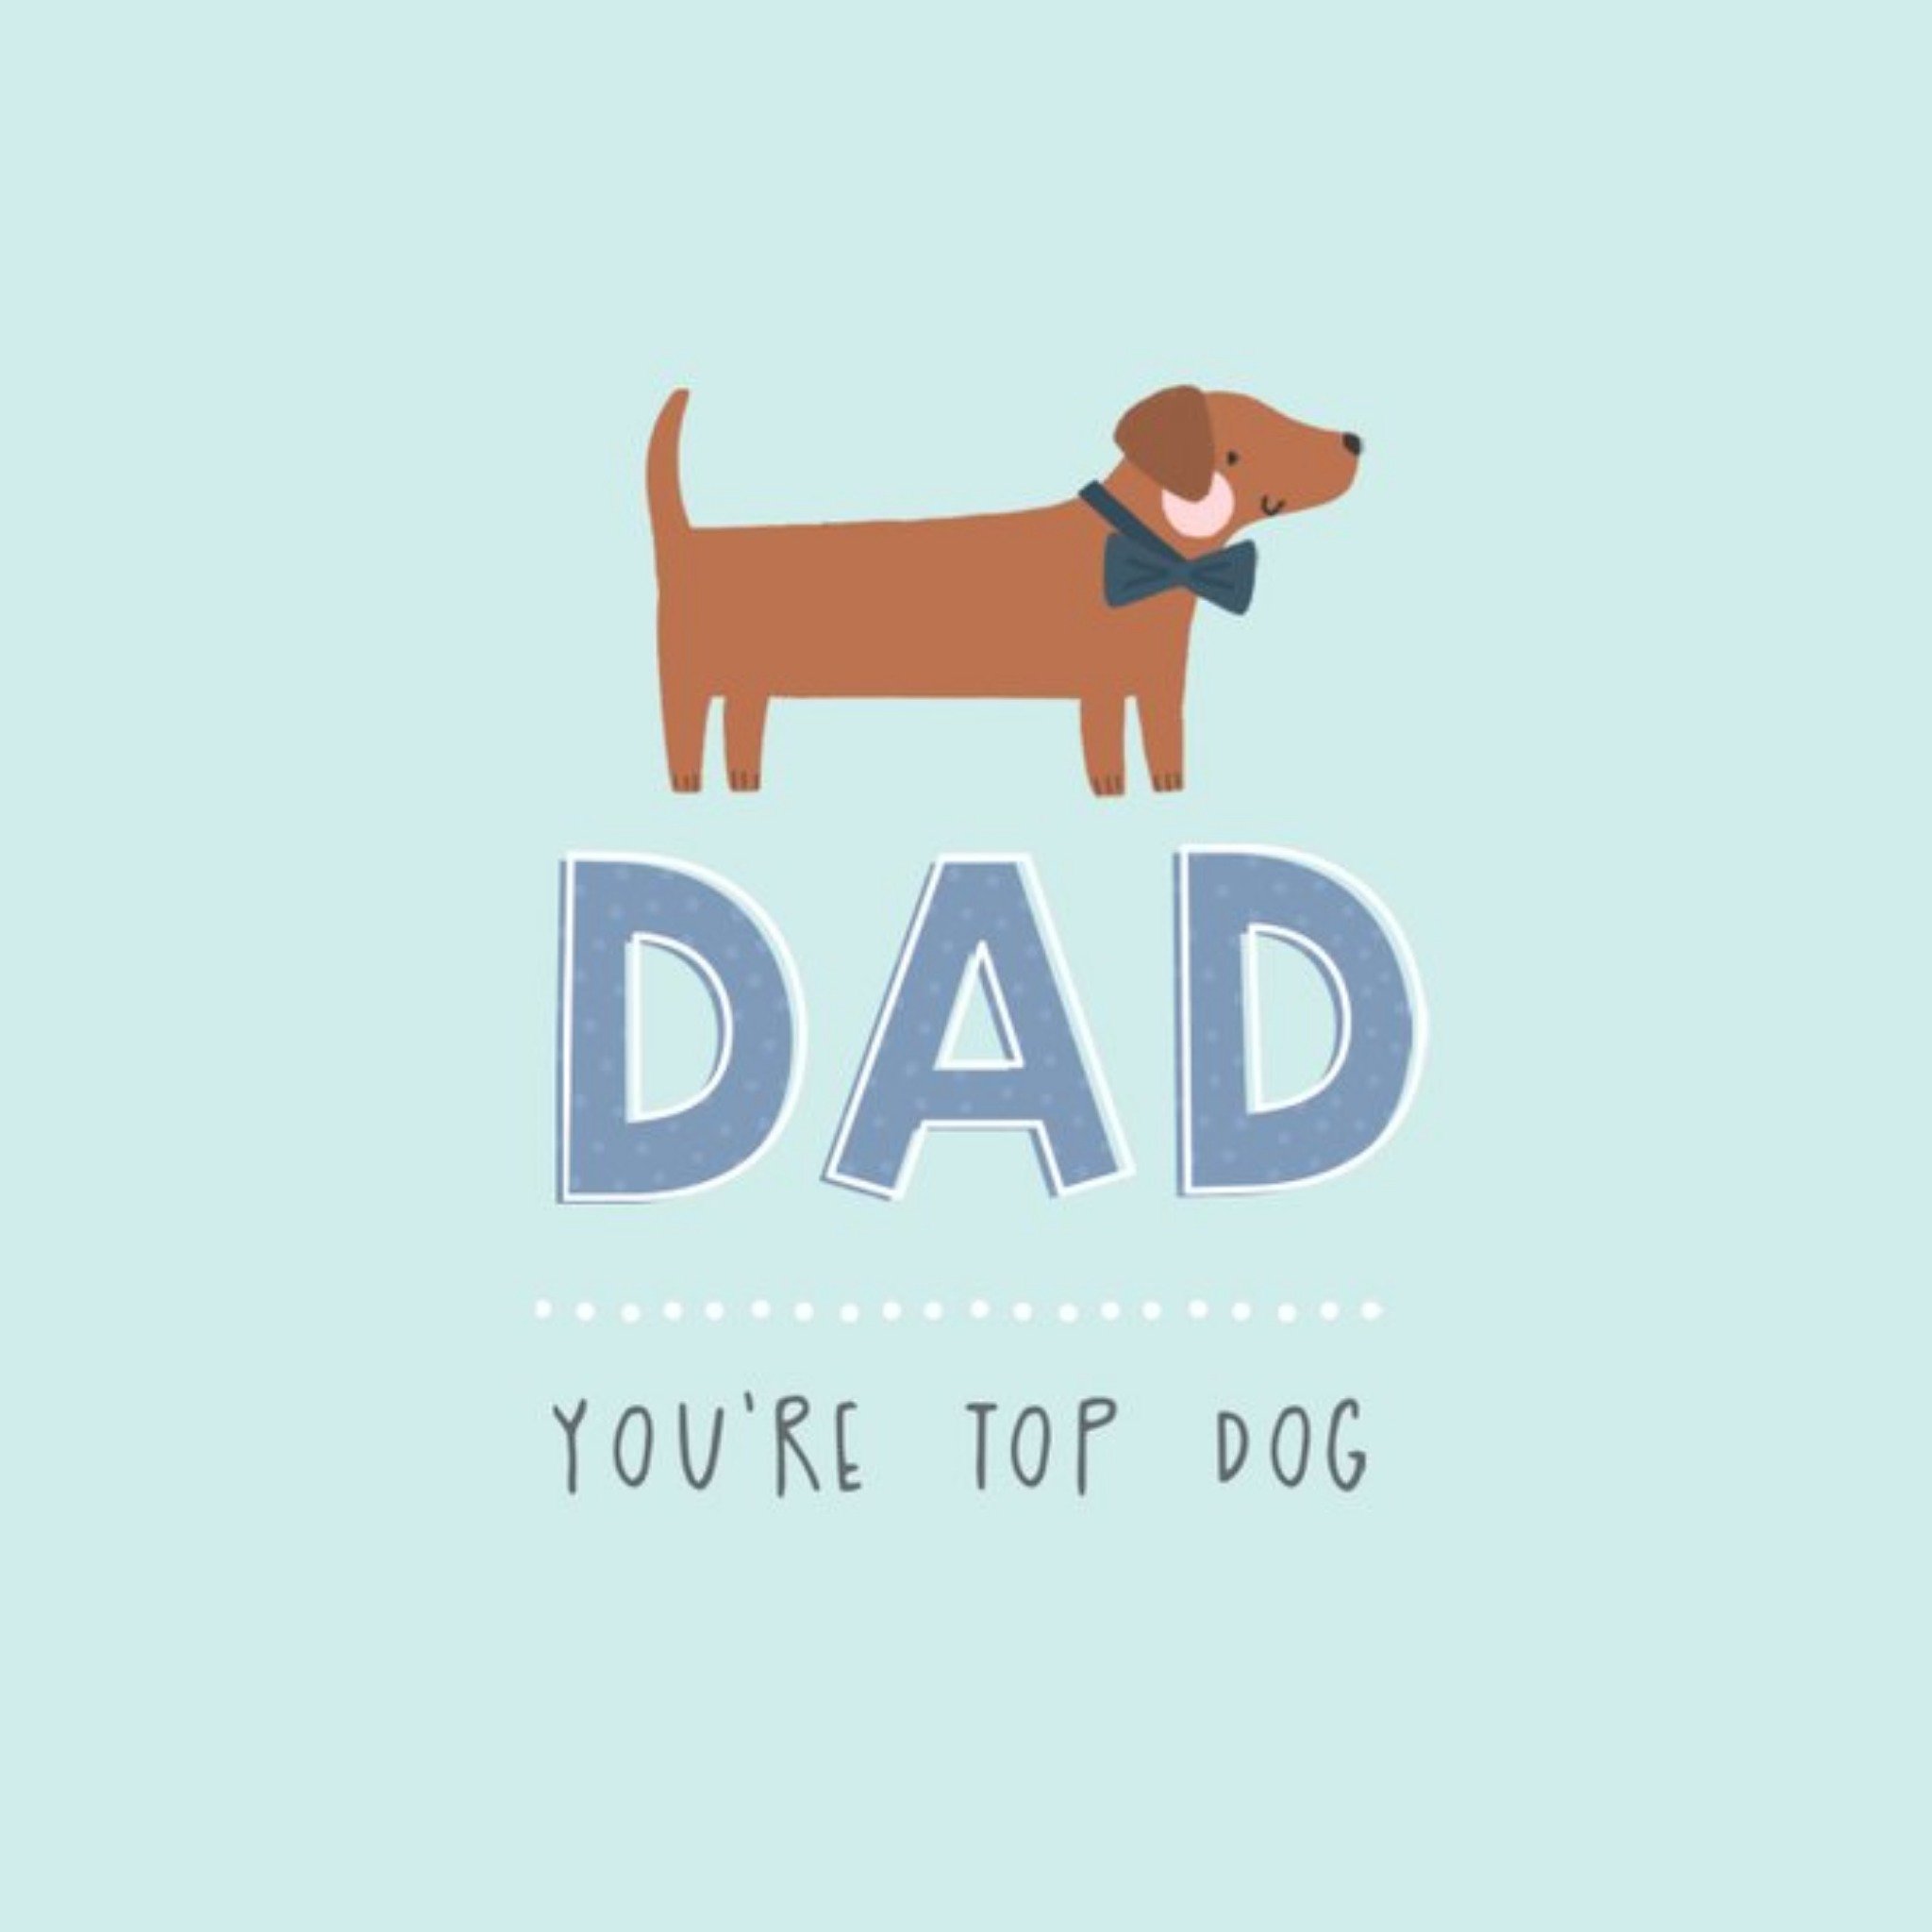 Moonpig Cute Illustration Of A Dog On A Blue Background Father's Day Card, Square